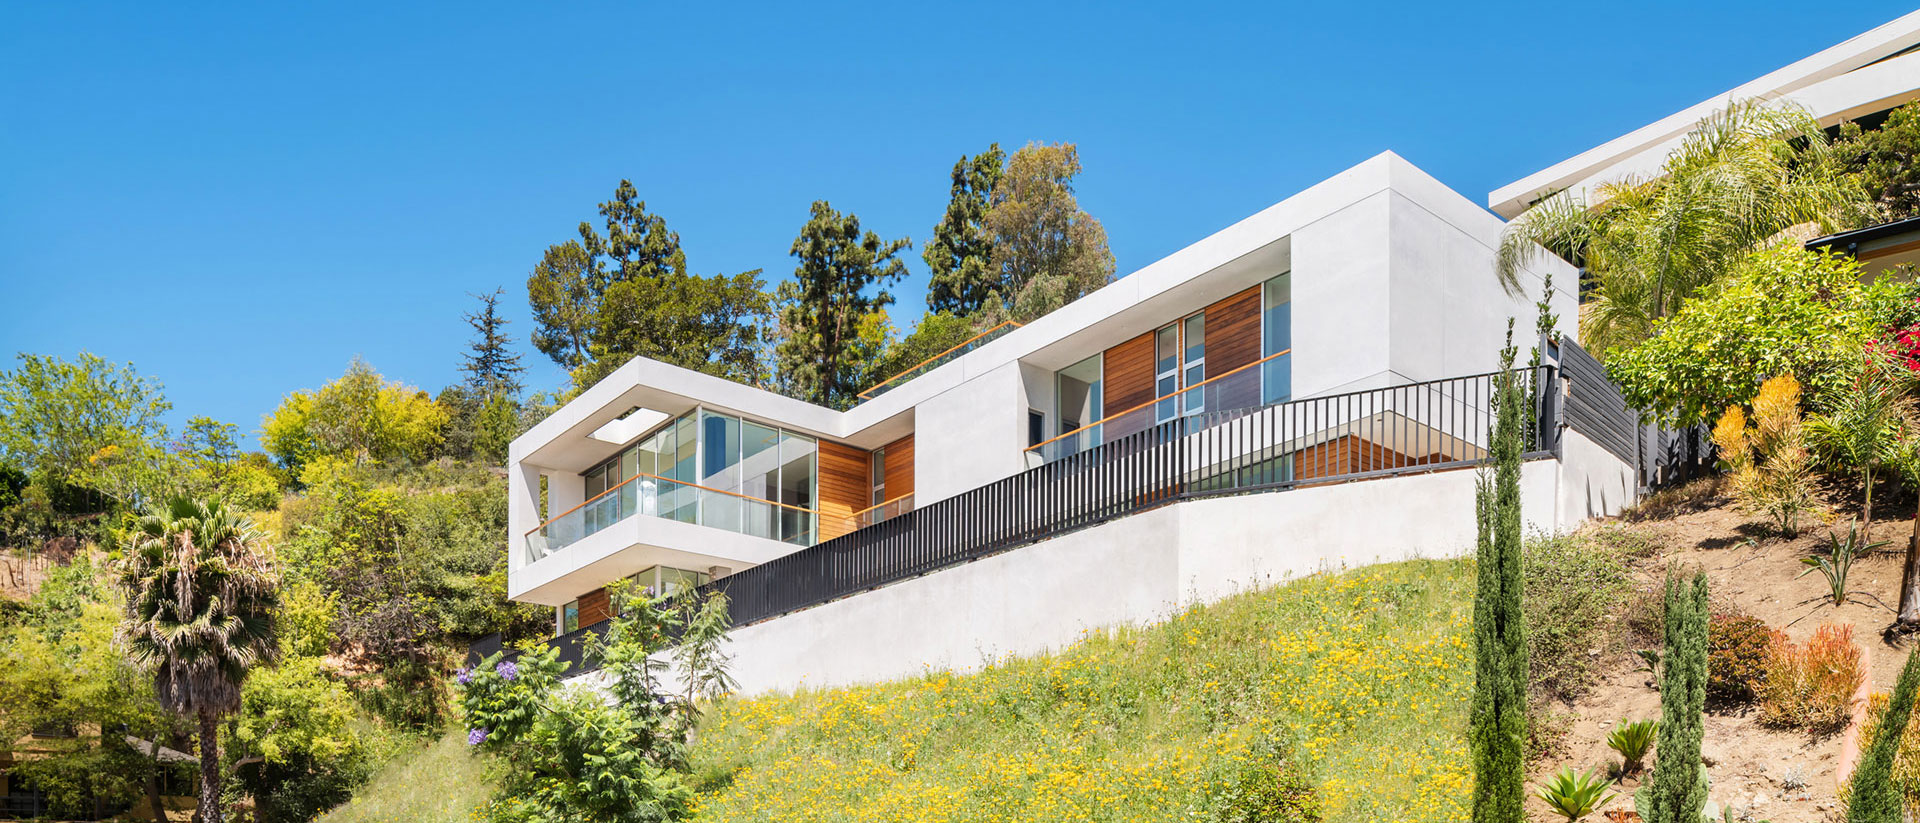 The Devlin Residence sits on a hill covered in California native wildflowers. Photo: © Paul Vu, Here and Now Agency.